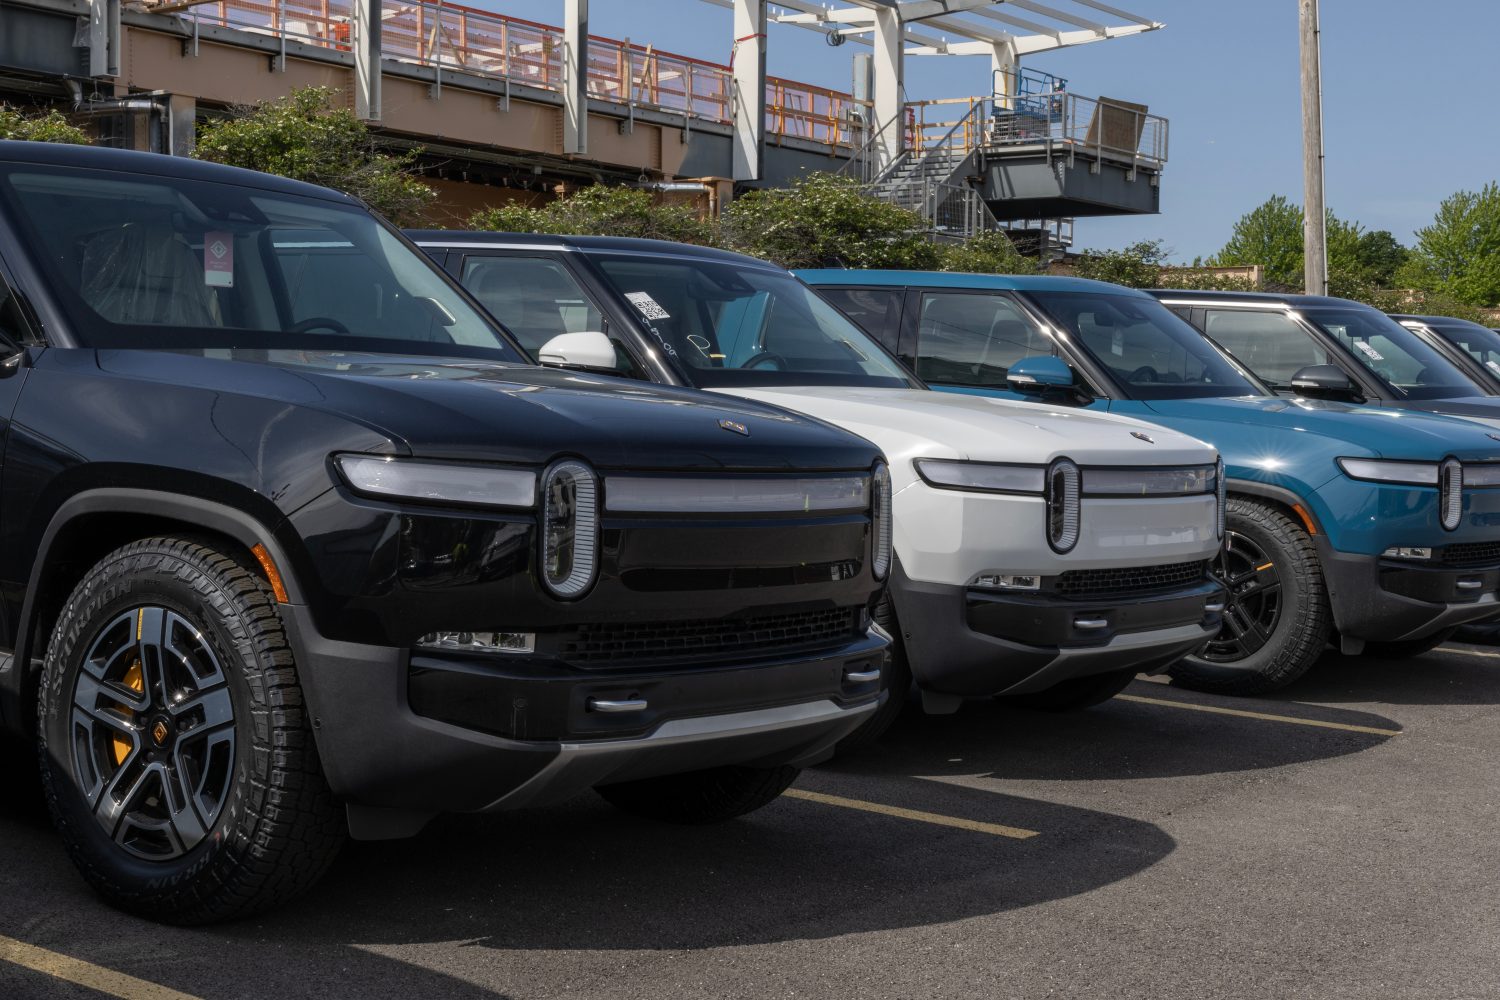 Volkswagen Group plans to invest up to $5 billion in Rivian, beginning with an initial $1 billion investment, followed by $4 billion by 2026